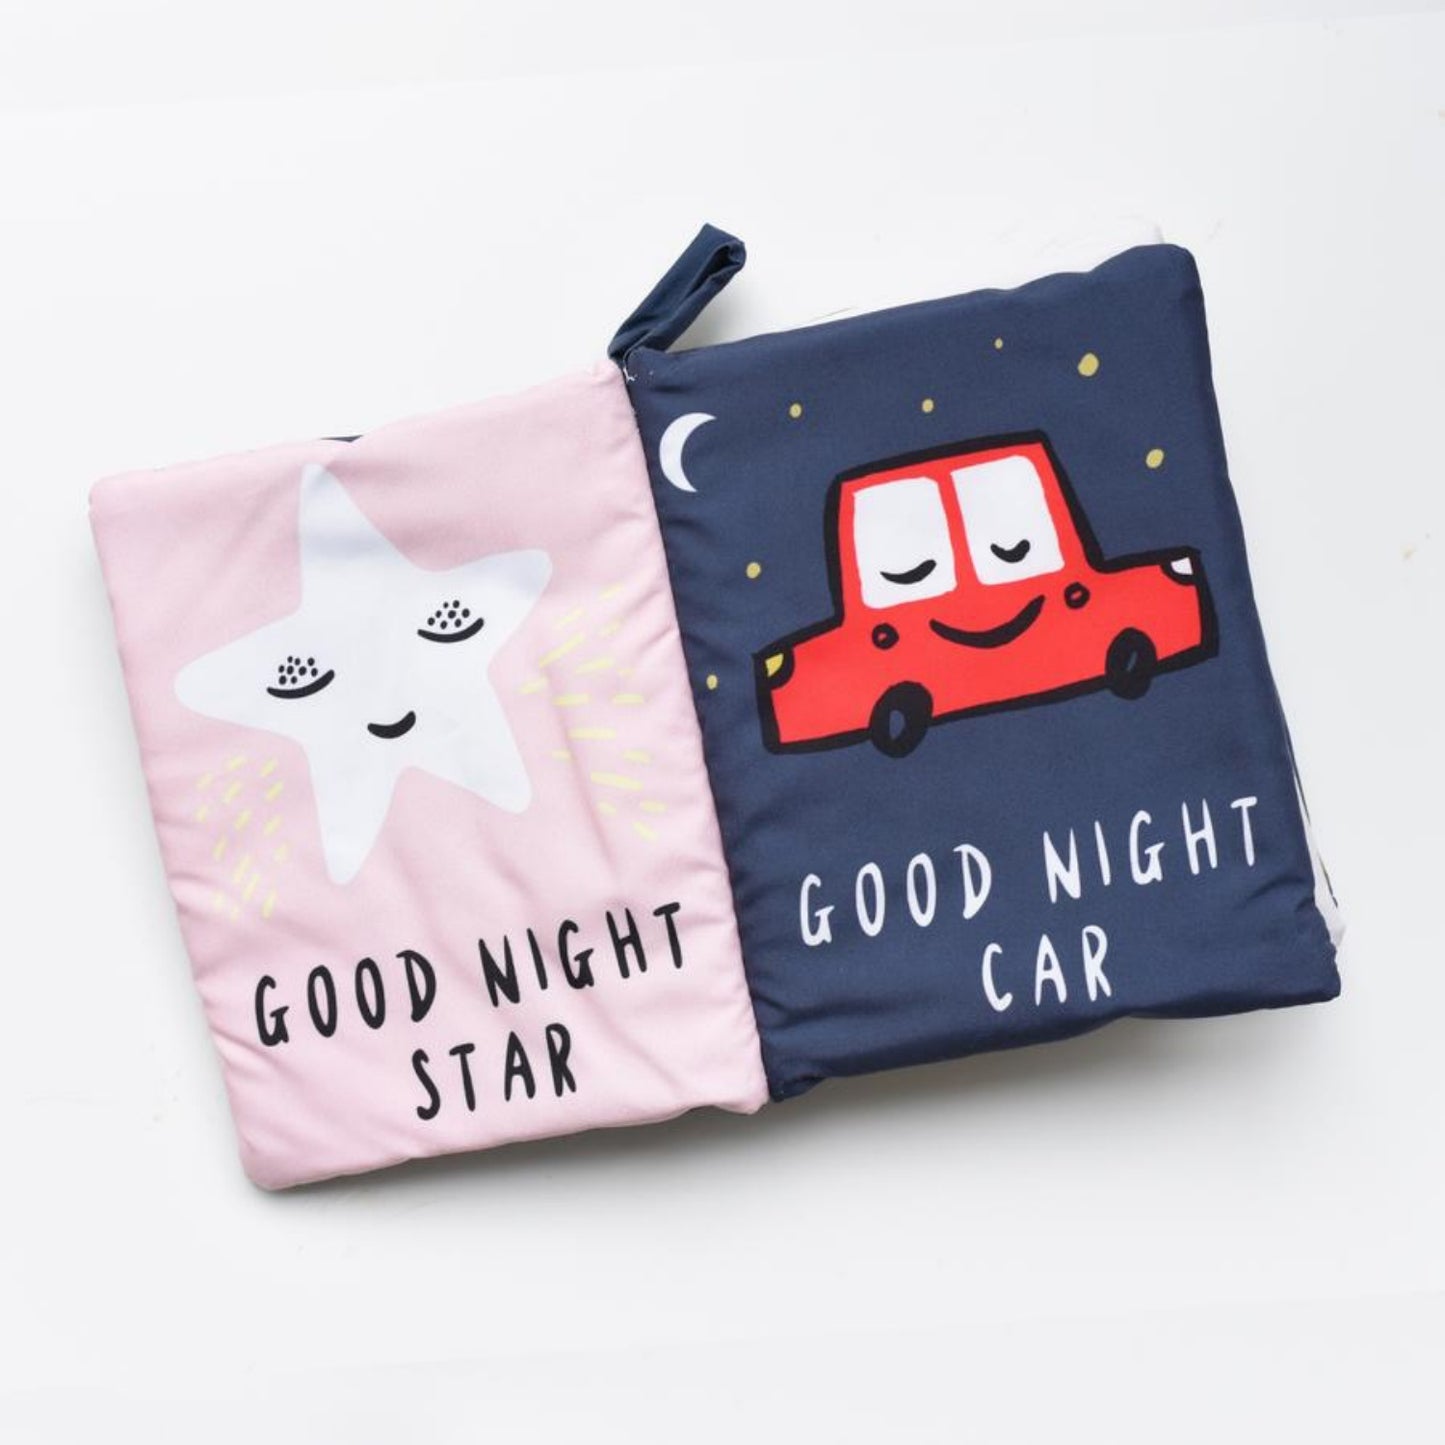 Goodnight You, Goodnight Me | Rag Book | Baby’s First Book